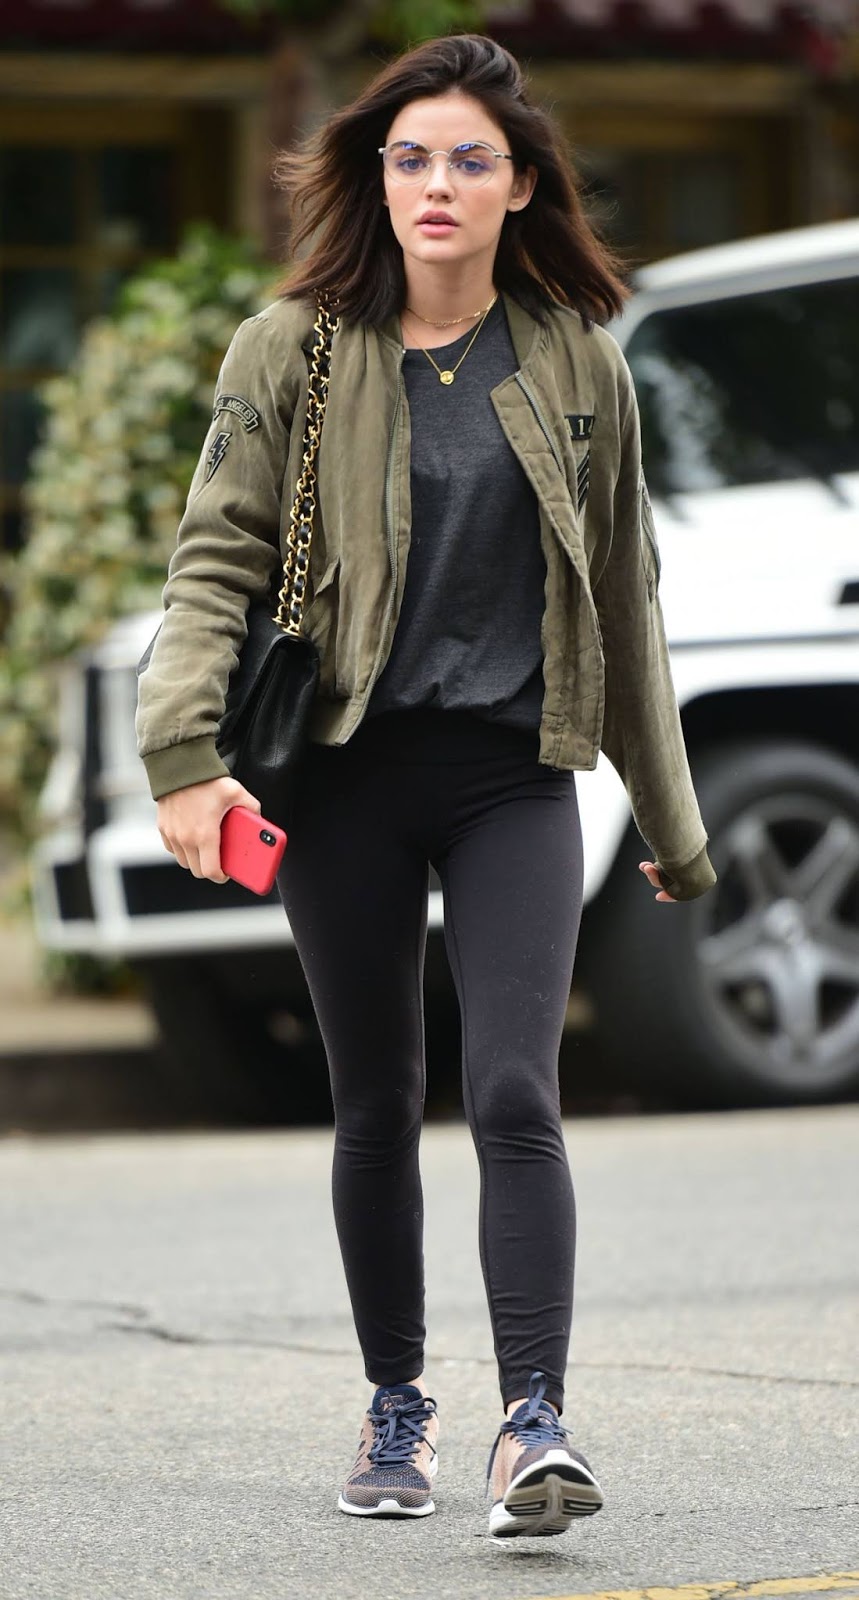 Lucy Hale high street style in bomber jacket photo